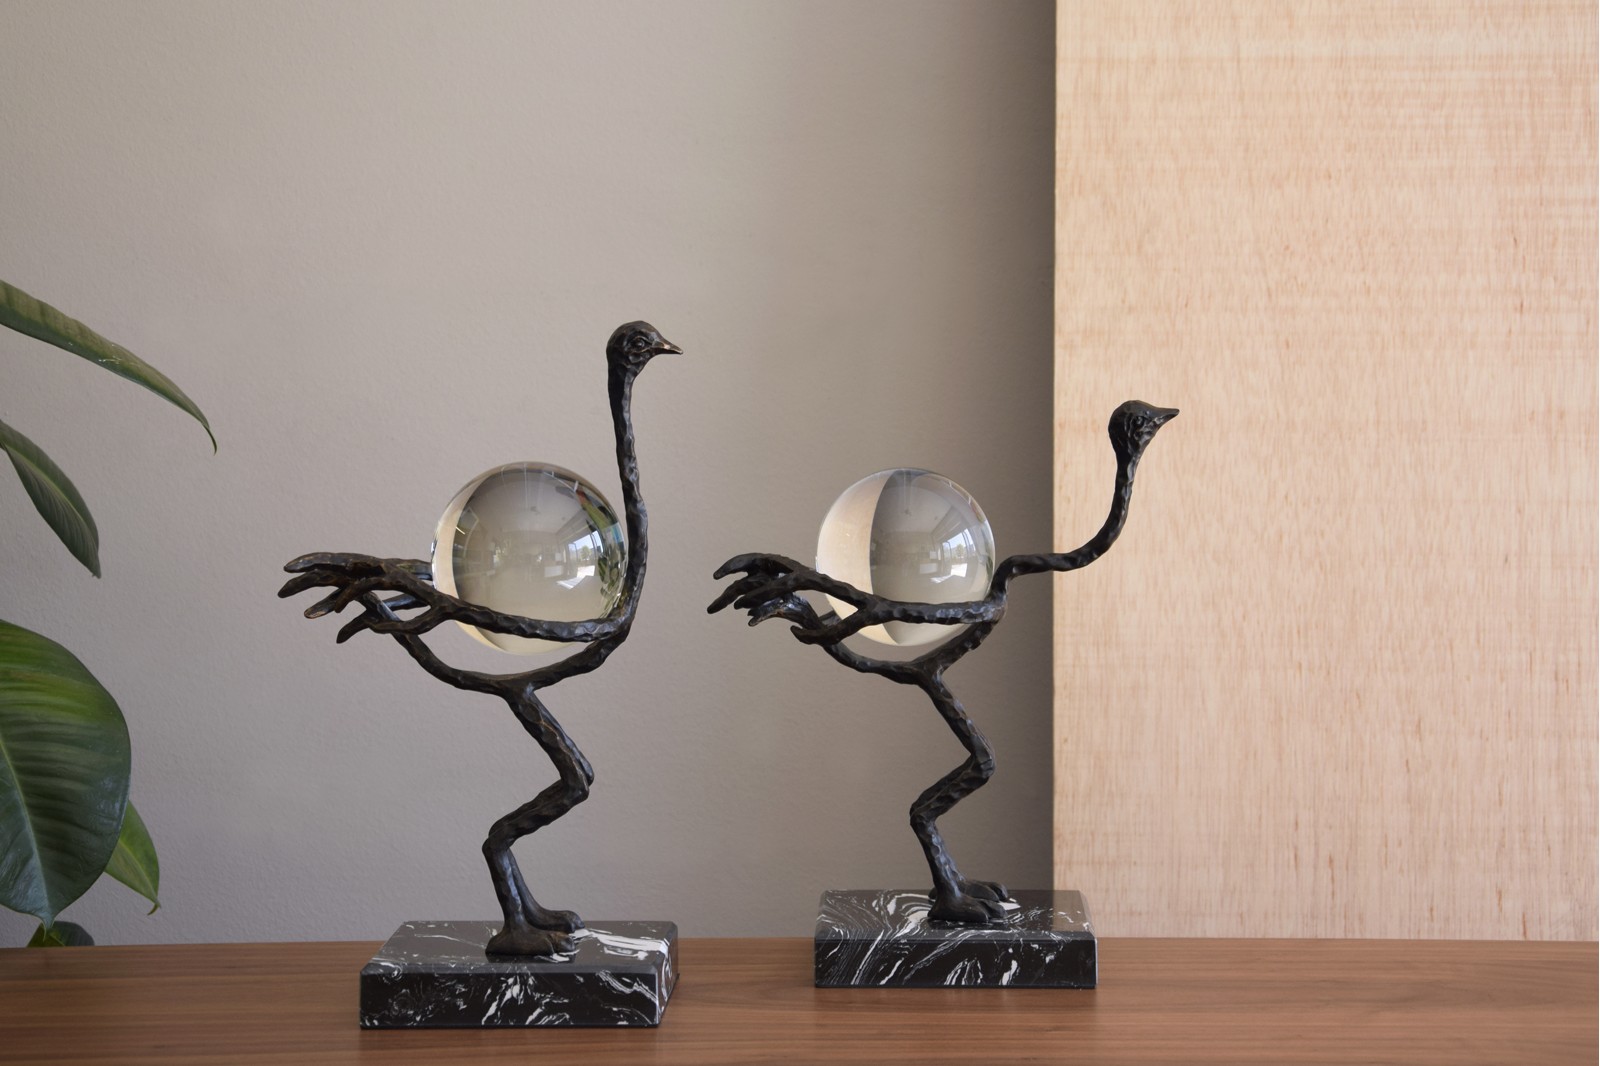 OSTRICH COLLECTION. METAL AND GLASS SCULPTURE